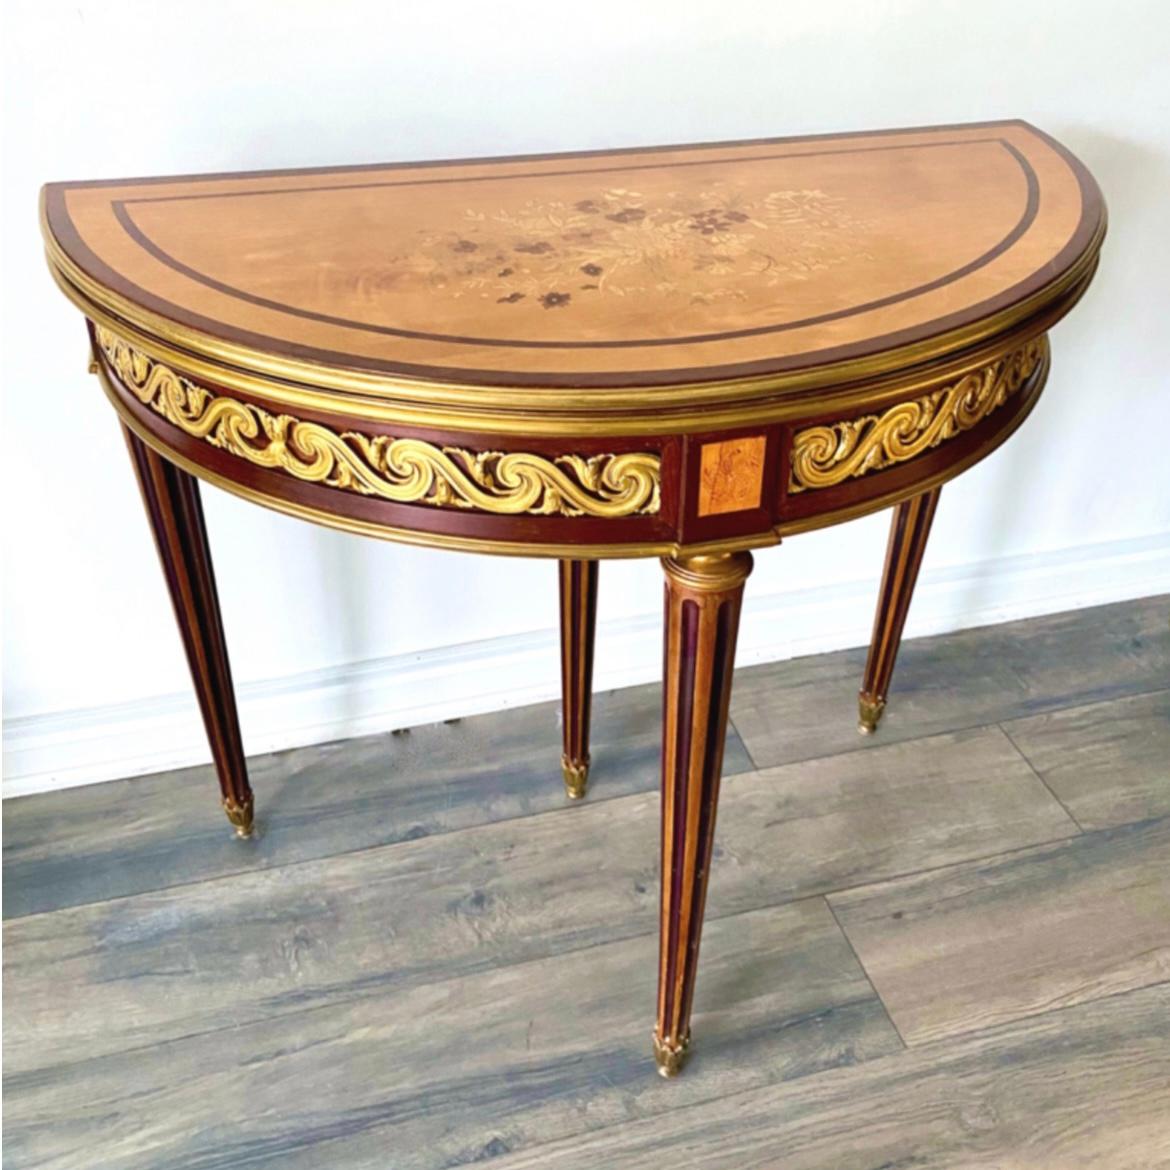 Our demi-lune table in the Louis XVI has a top with beautiful floral marquetry inlay, frieze with gilt bronze Vitruvian scroll motif, hand-painted fruitwood rosettes, fluted legs with bronze feet. 29.75 inches tall and 35 inches wide and 17.5 inches